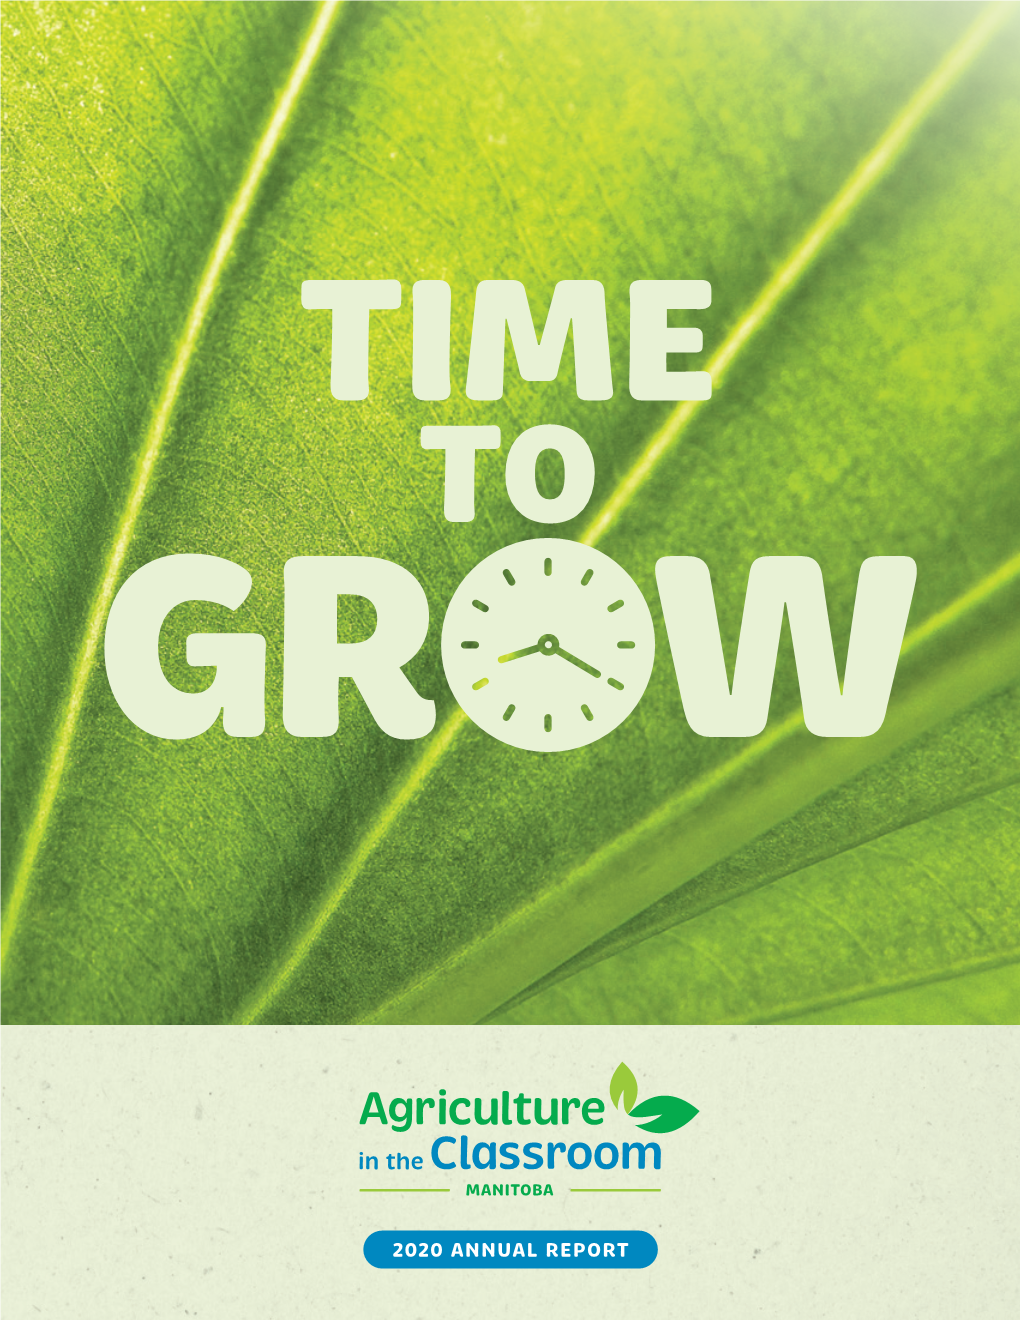 2020 ANNUAL REPORT Growing Agriculture Literacy in Manitoba Growth Takes Time Plants Need Water, Light, Food And, Most Importantly, Time to Grow